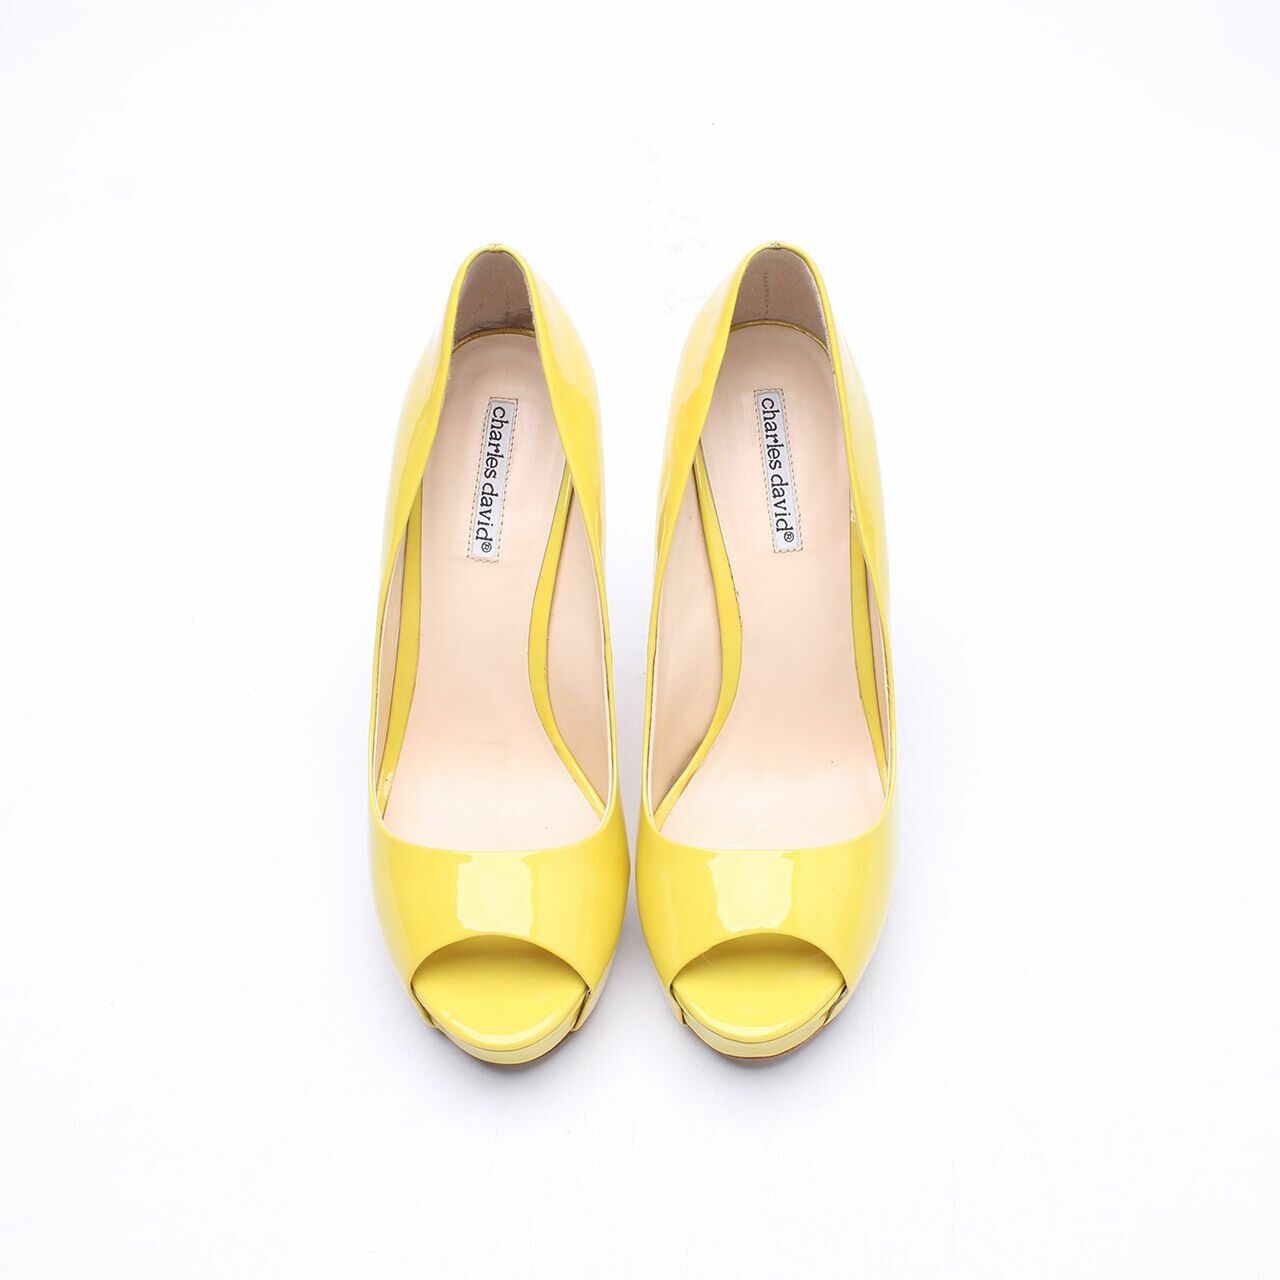 Charles David Lime Patent Leather Heels